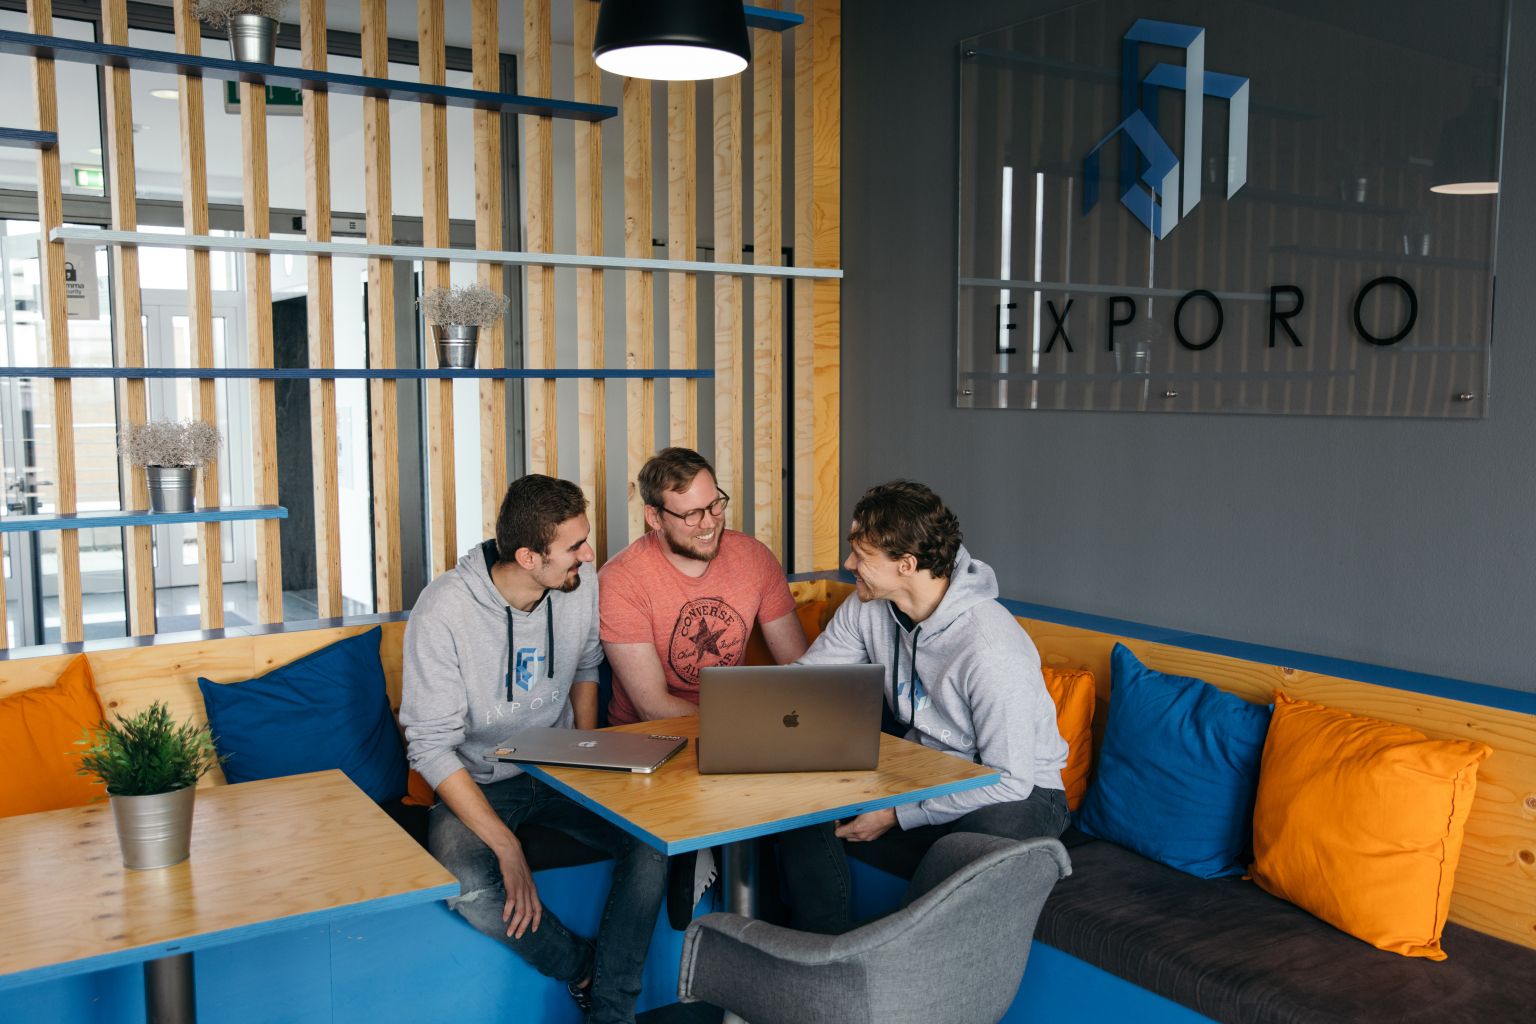 Three men sit around a laptop at the Exporo office.